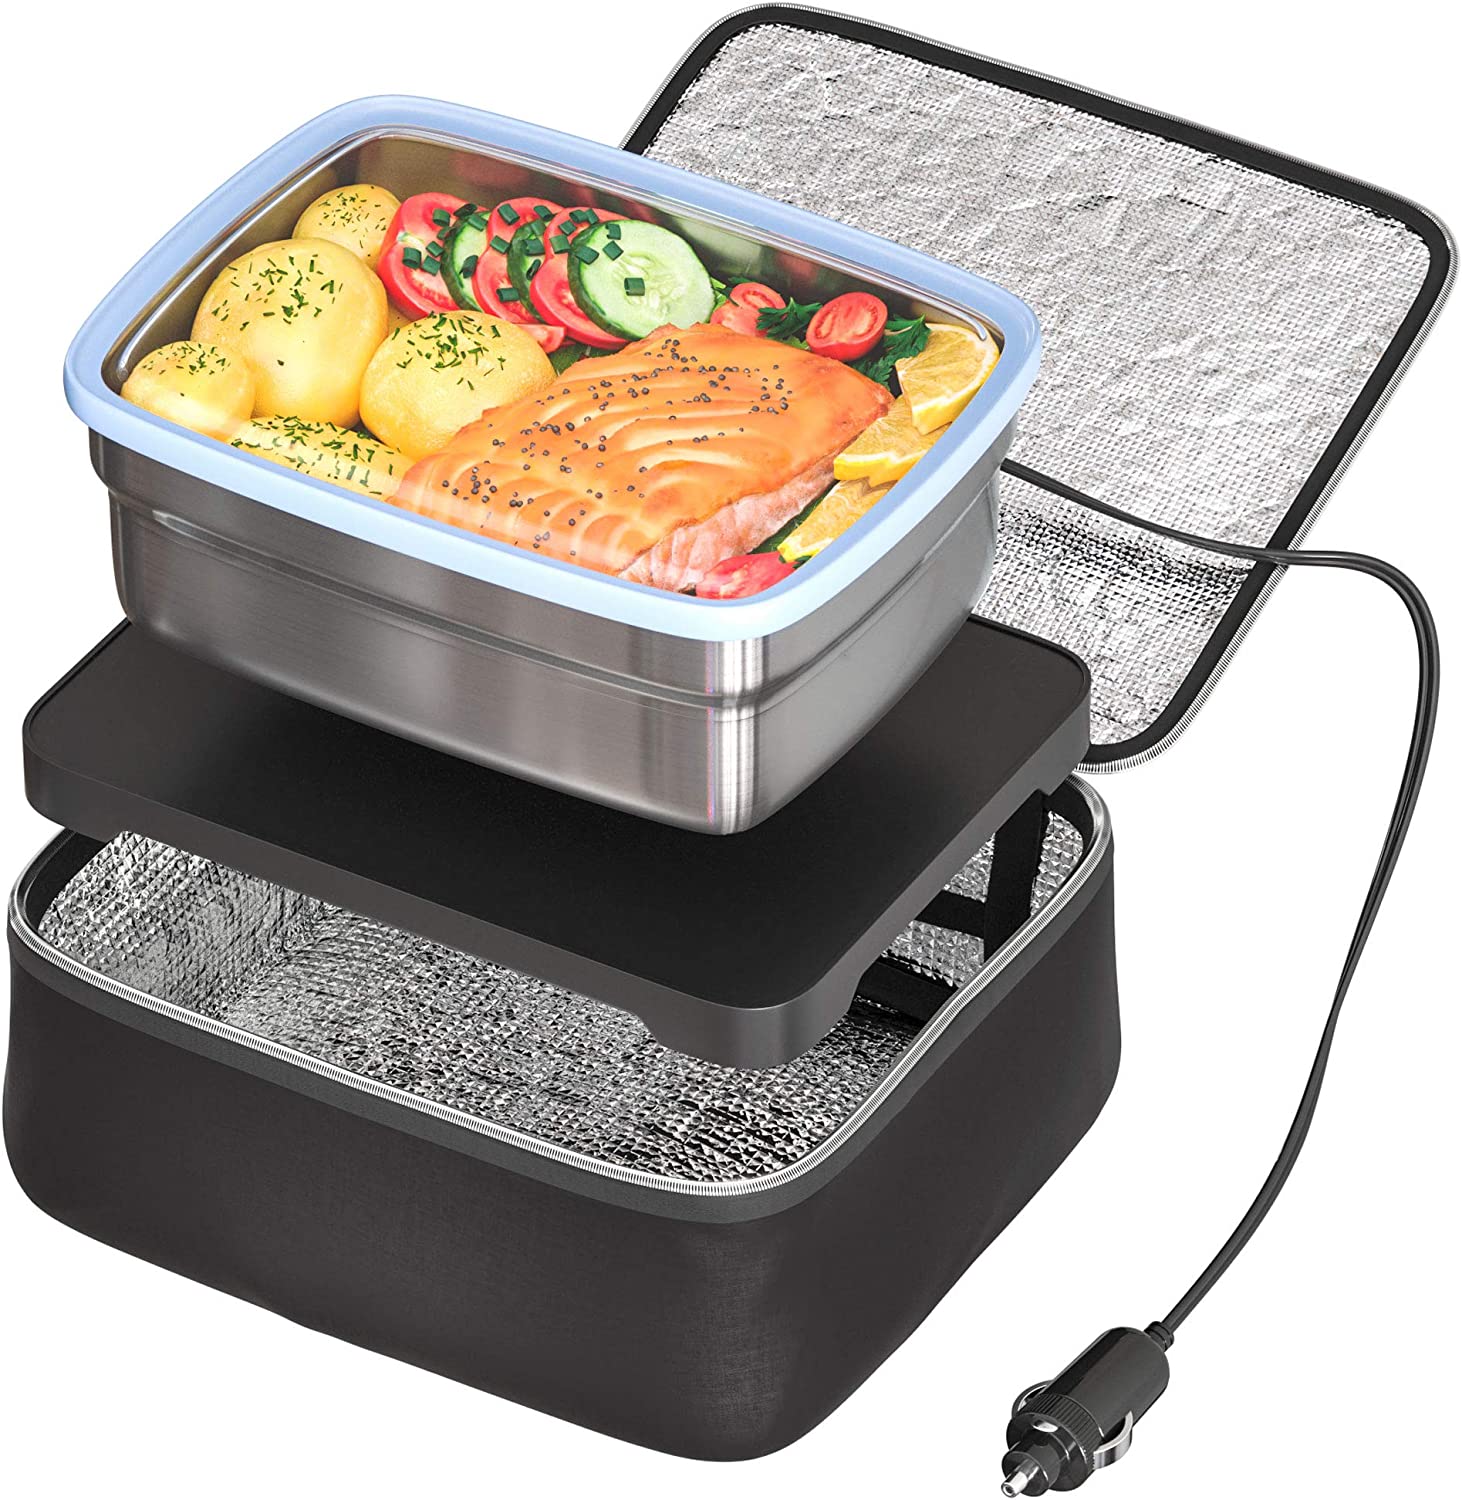 Mini Microwave Portable Lunch Box,2 In 1 Portable Food Warmer For